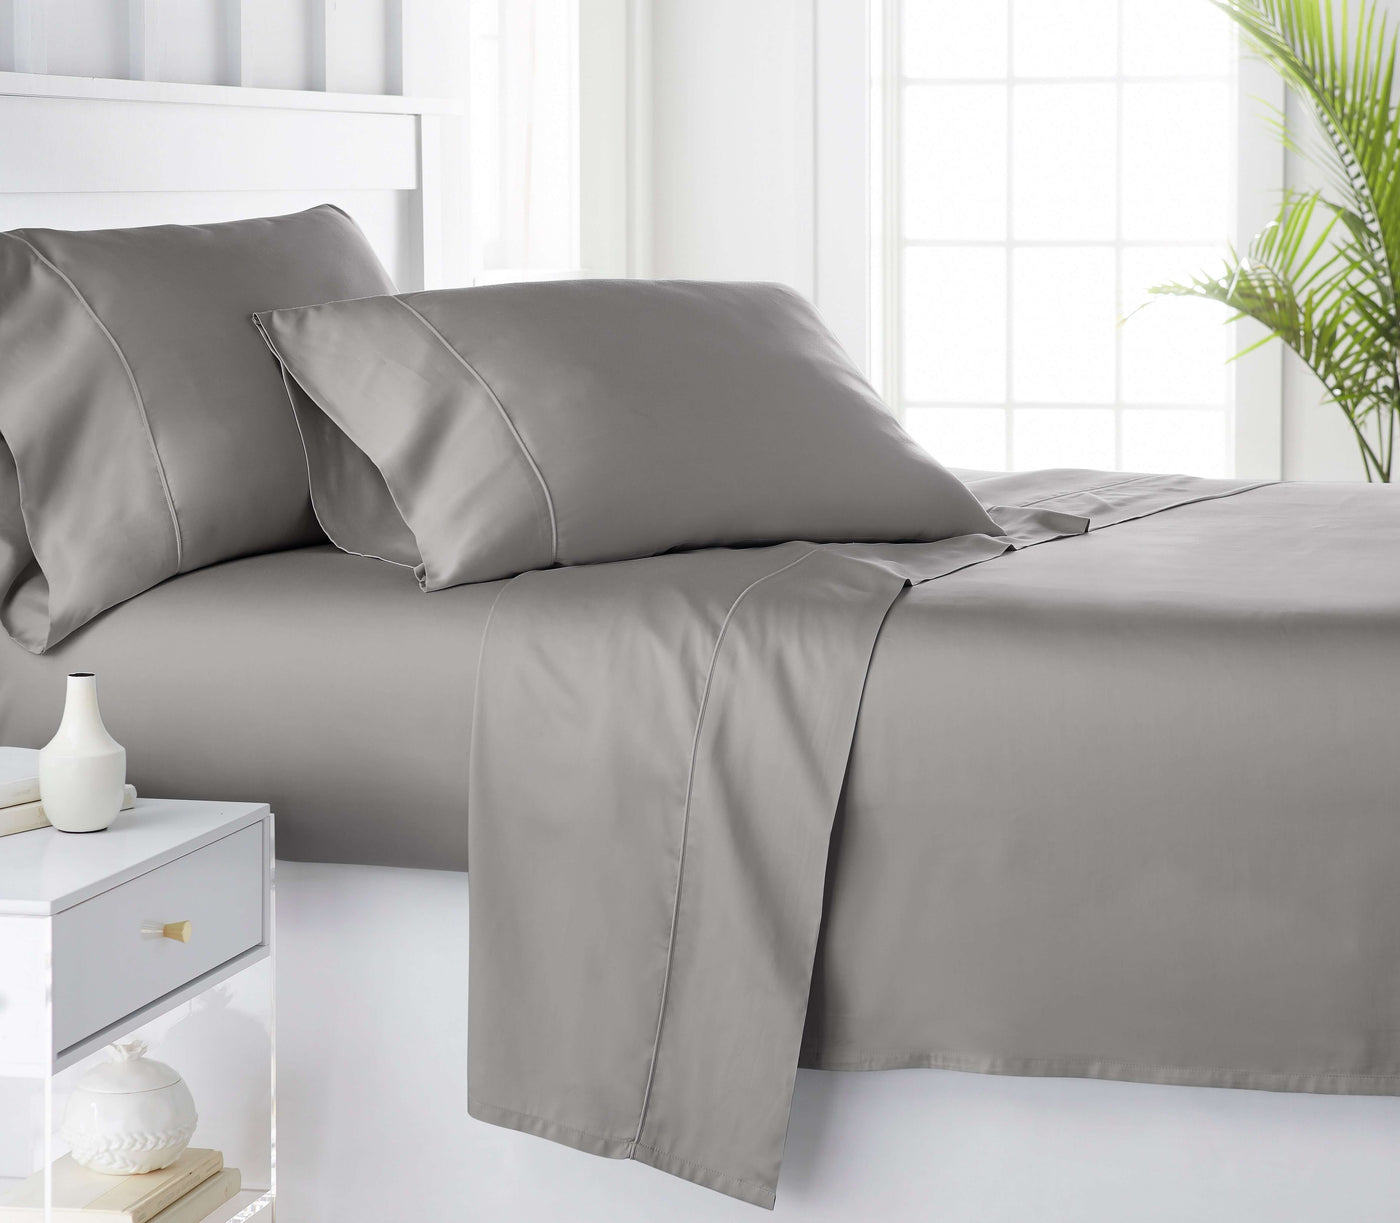 Grey organic bamboo bed sheets on the bed